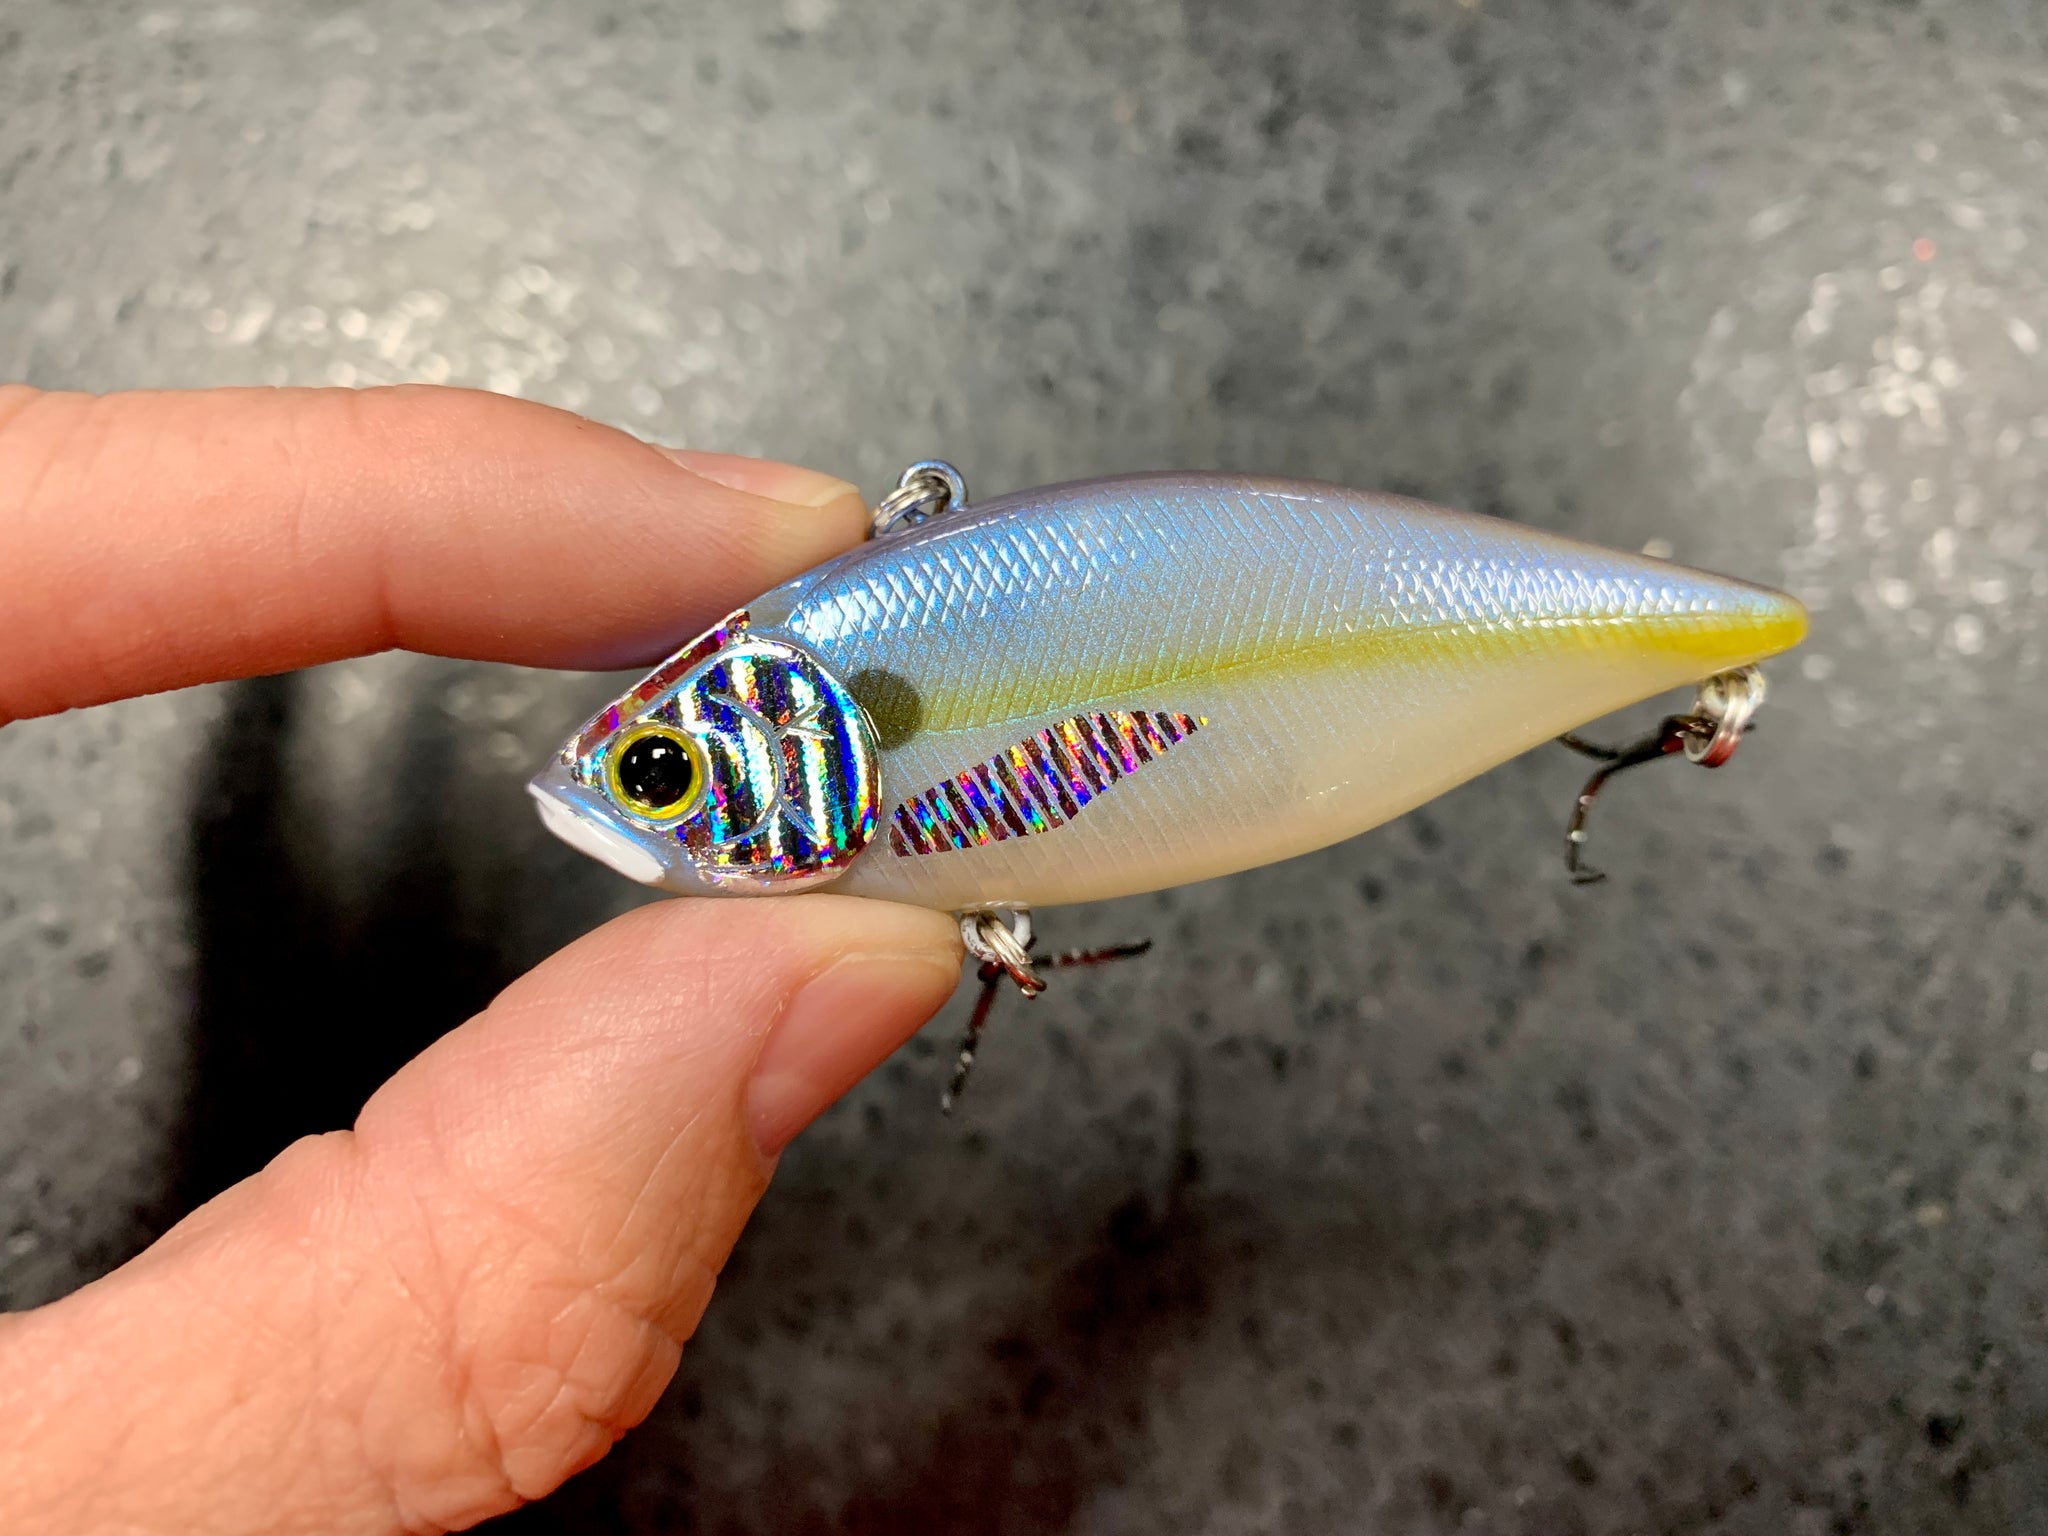 LUCKY CRAFT LV-500 Max - 419 BP Golden Shiner (1qty) Top Quality